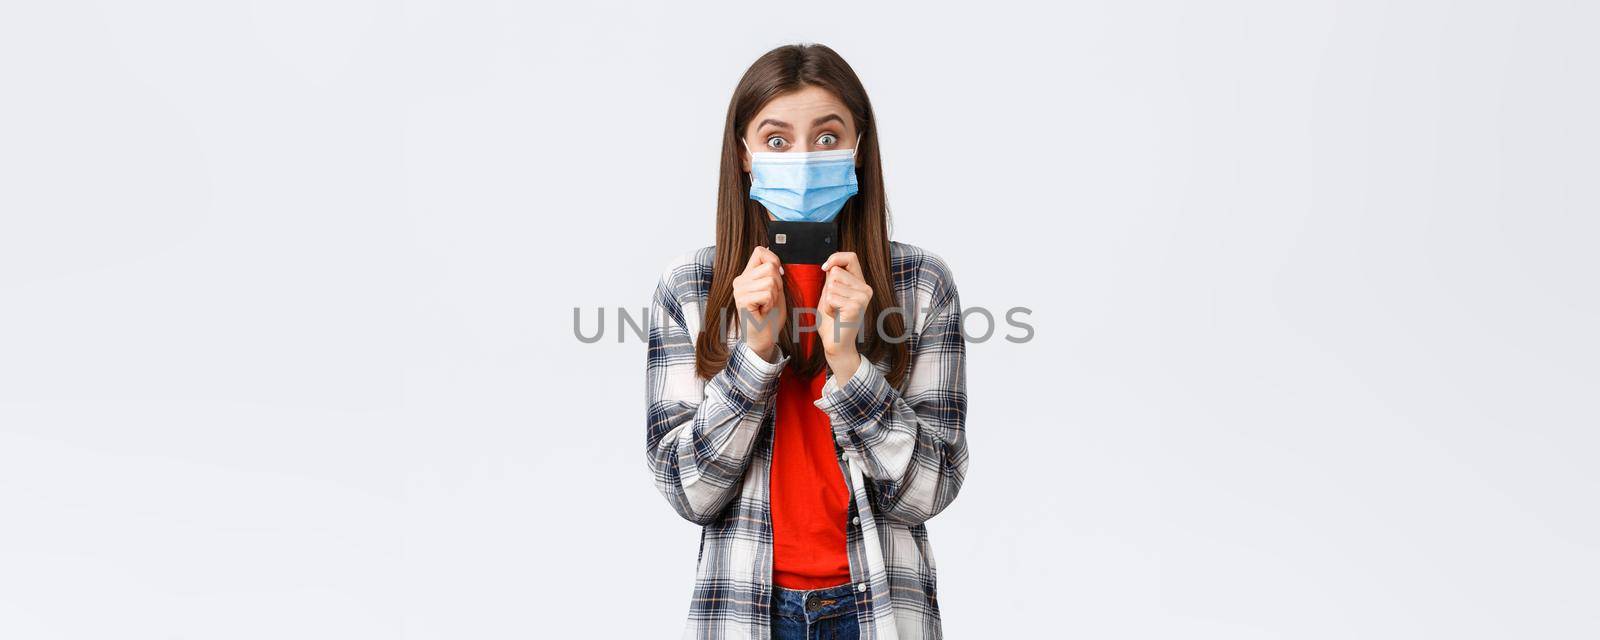 Coronavirus outbreak, working from home, online shopping and contactless payment concept. Rejoicing, happy pretty woman in medical mask showing credit card, smiling white background.